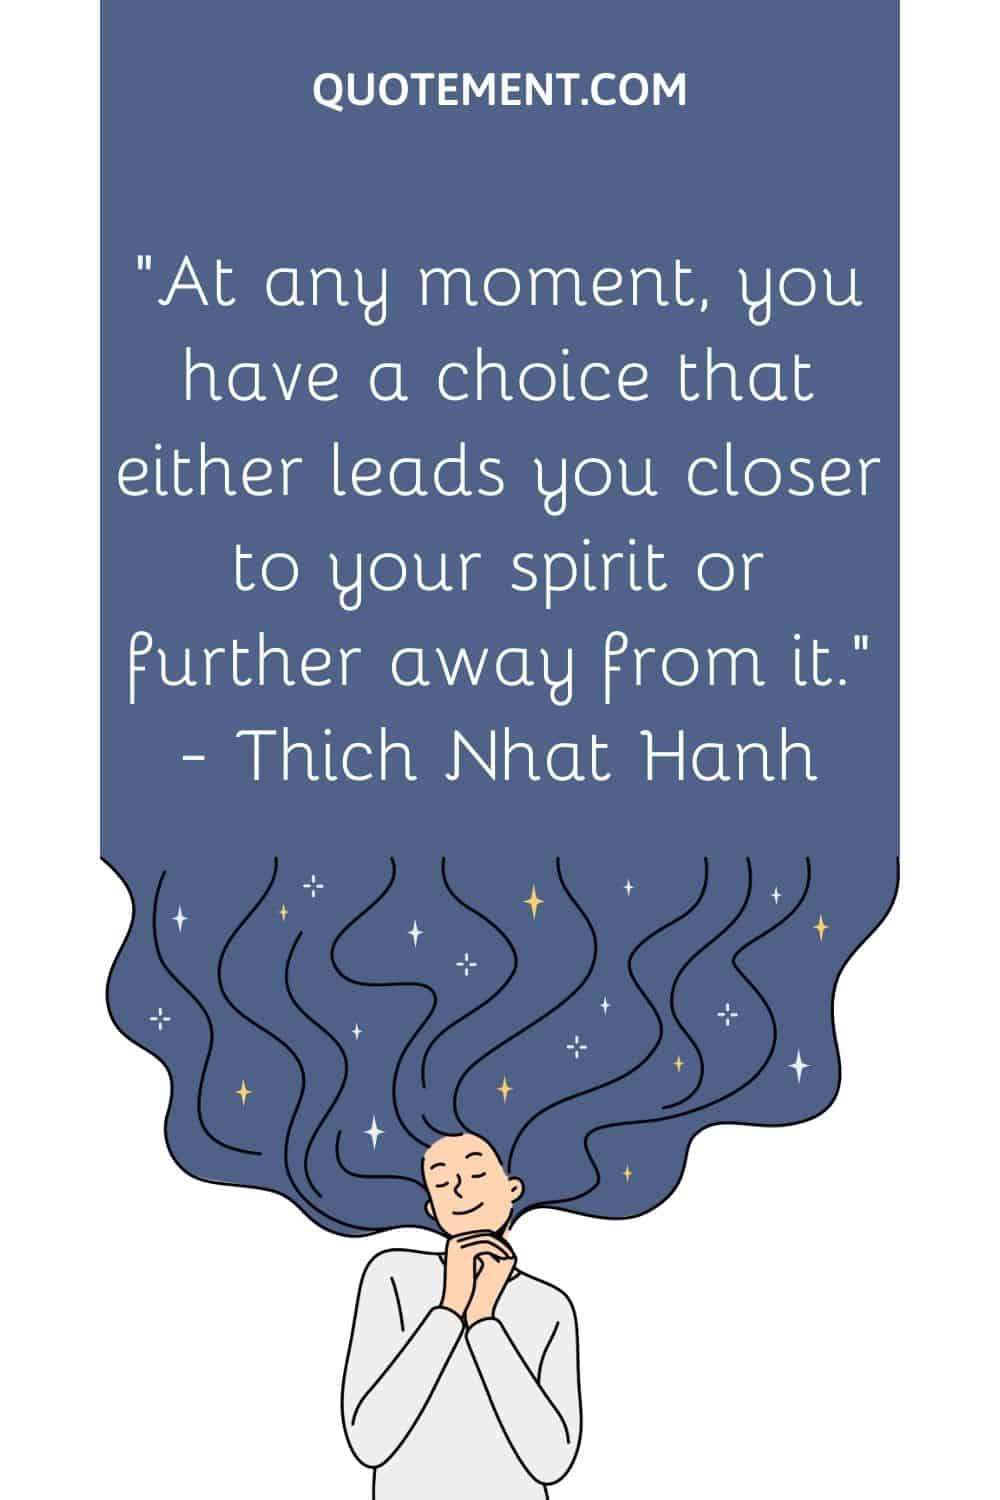 At any moment, you have a choice that either leads you closer to your spirit or further away from it